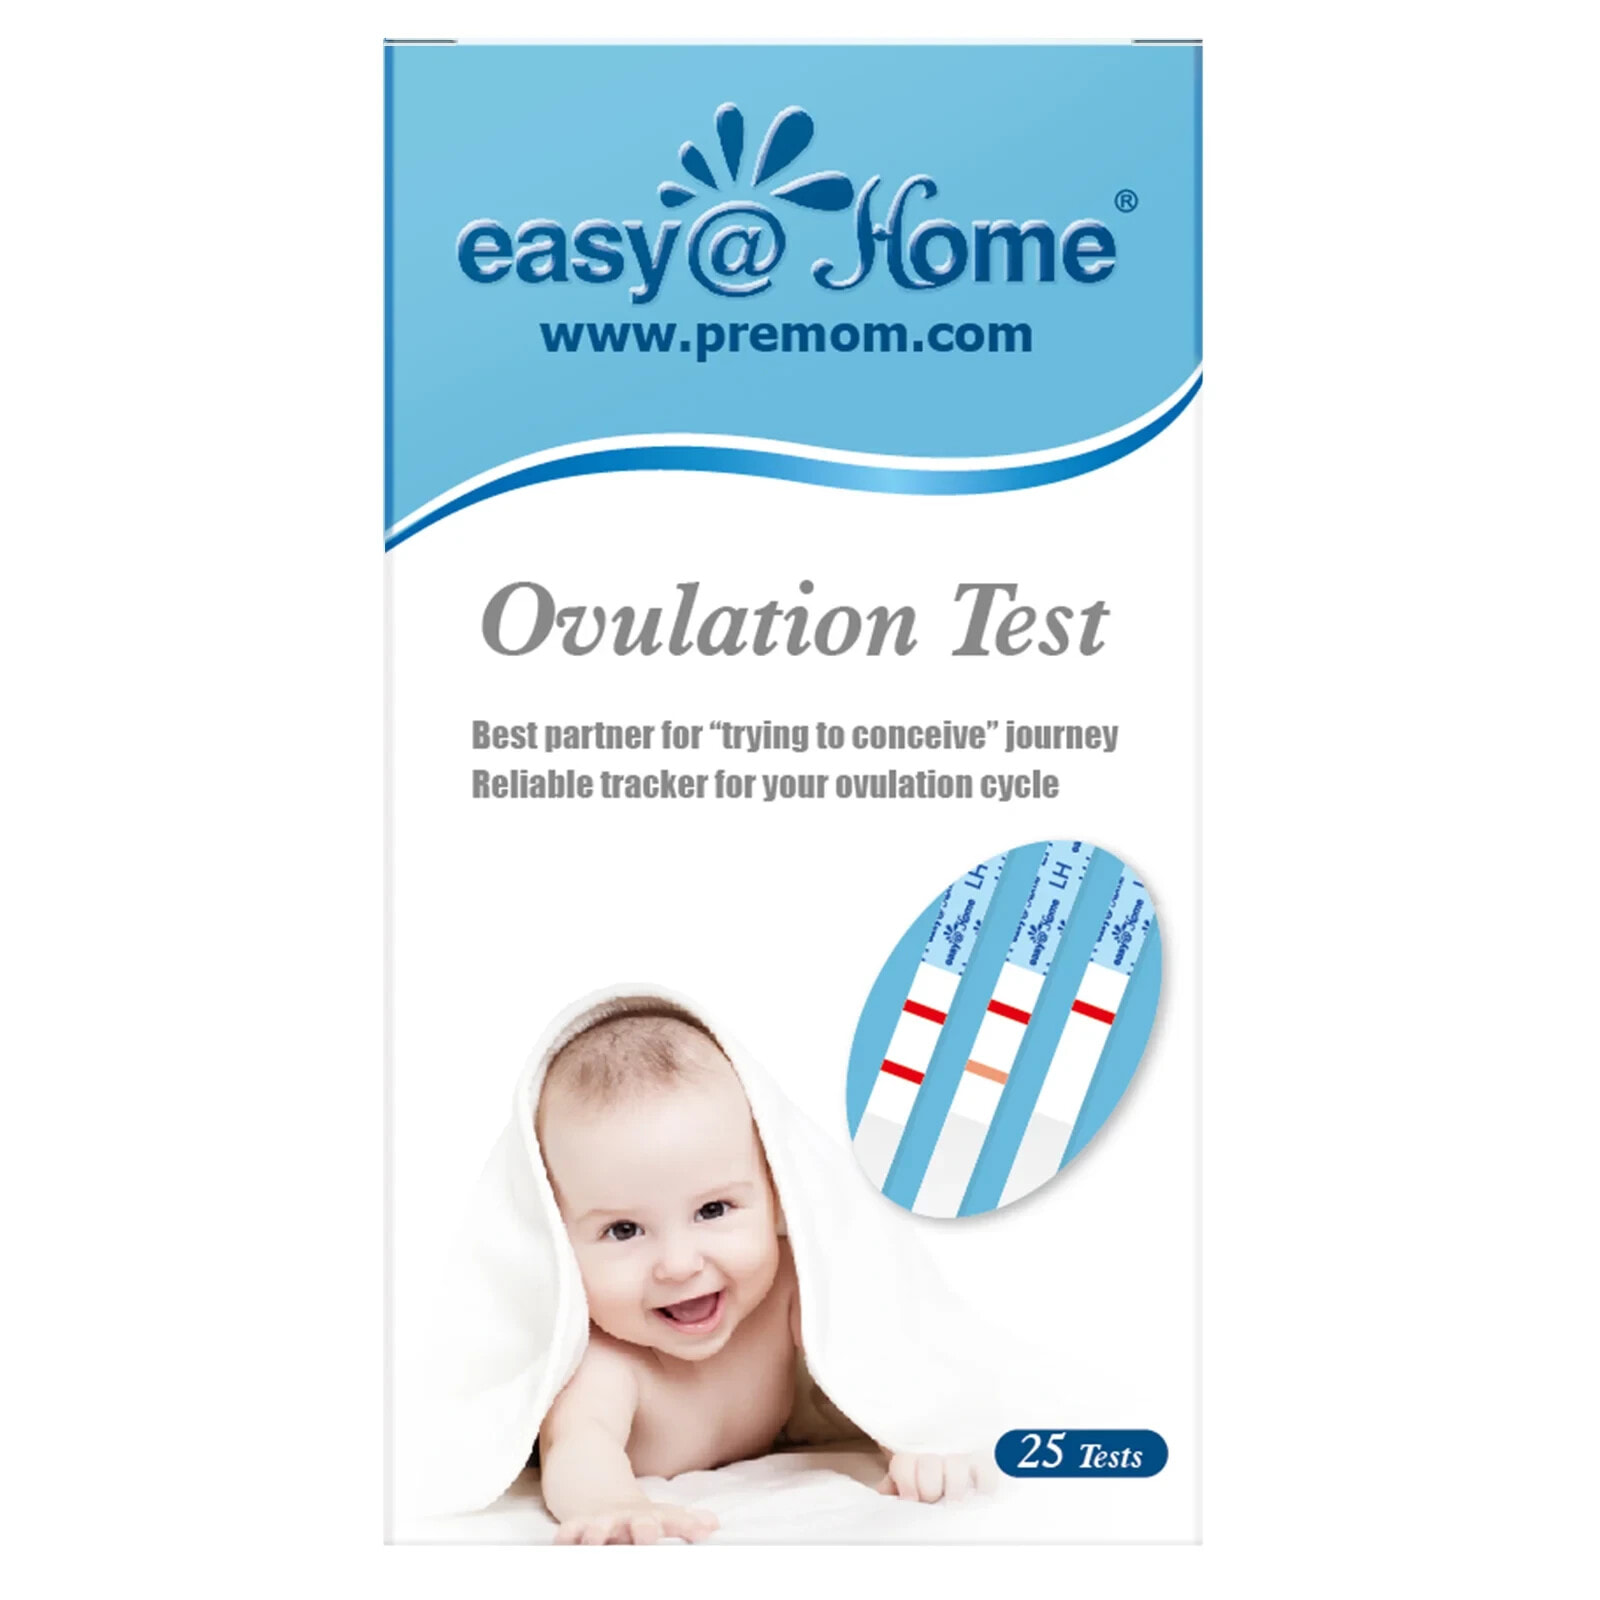 [email protected], Ovulation Test, 25 Tests